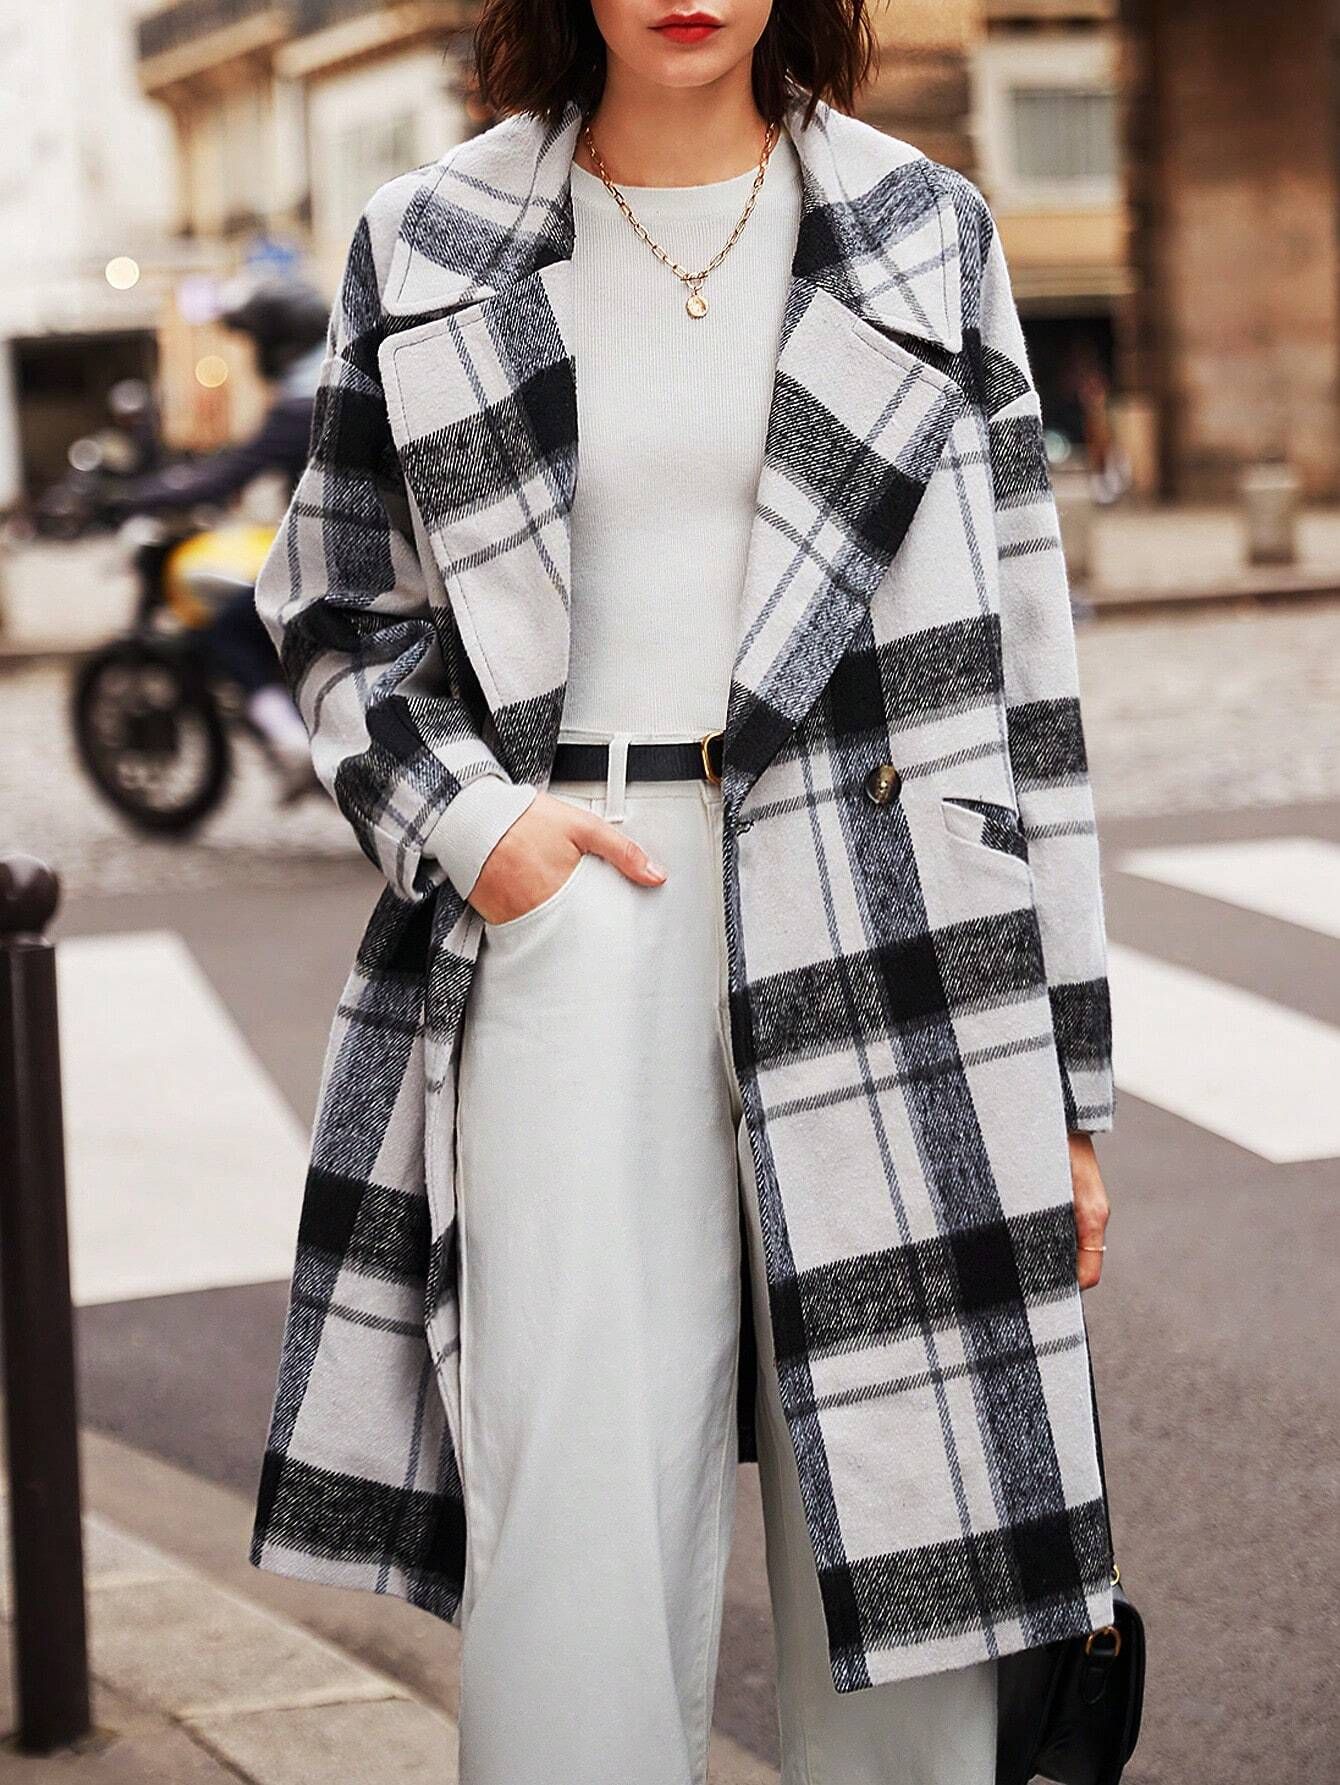 SHEIN Frenchy Drop Shoulder Double Button Plaid Overcoat | SHEIN